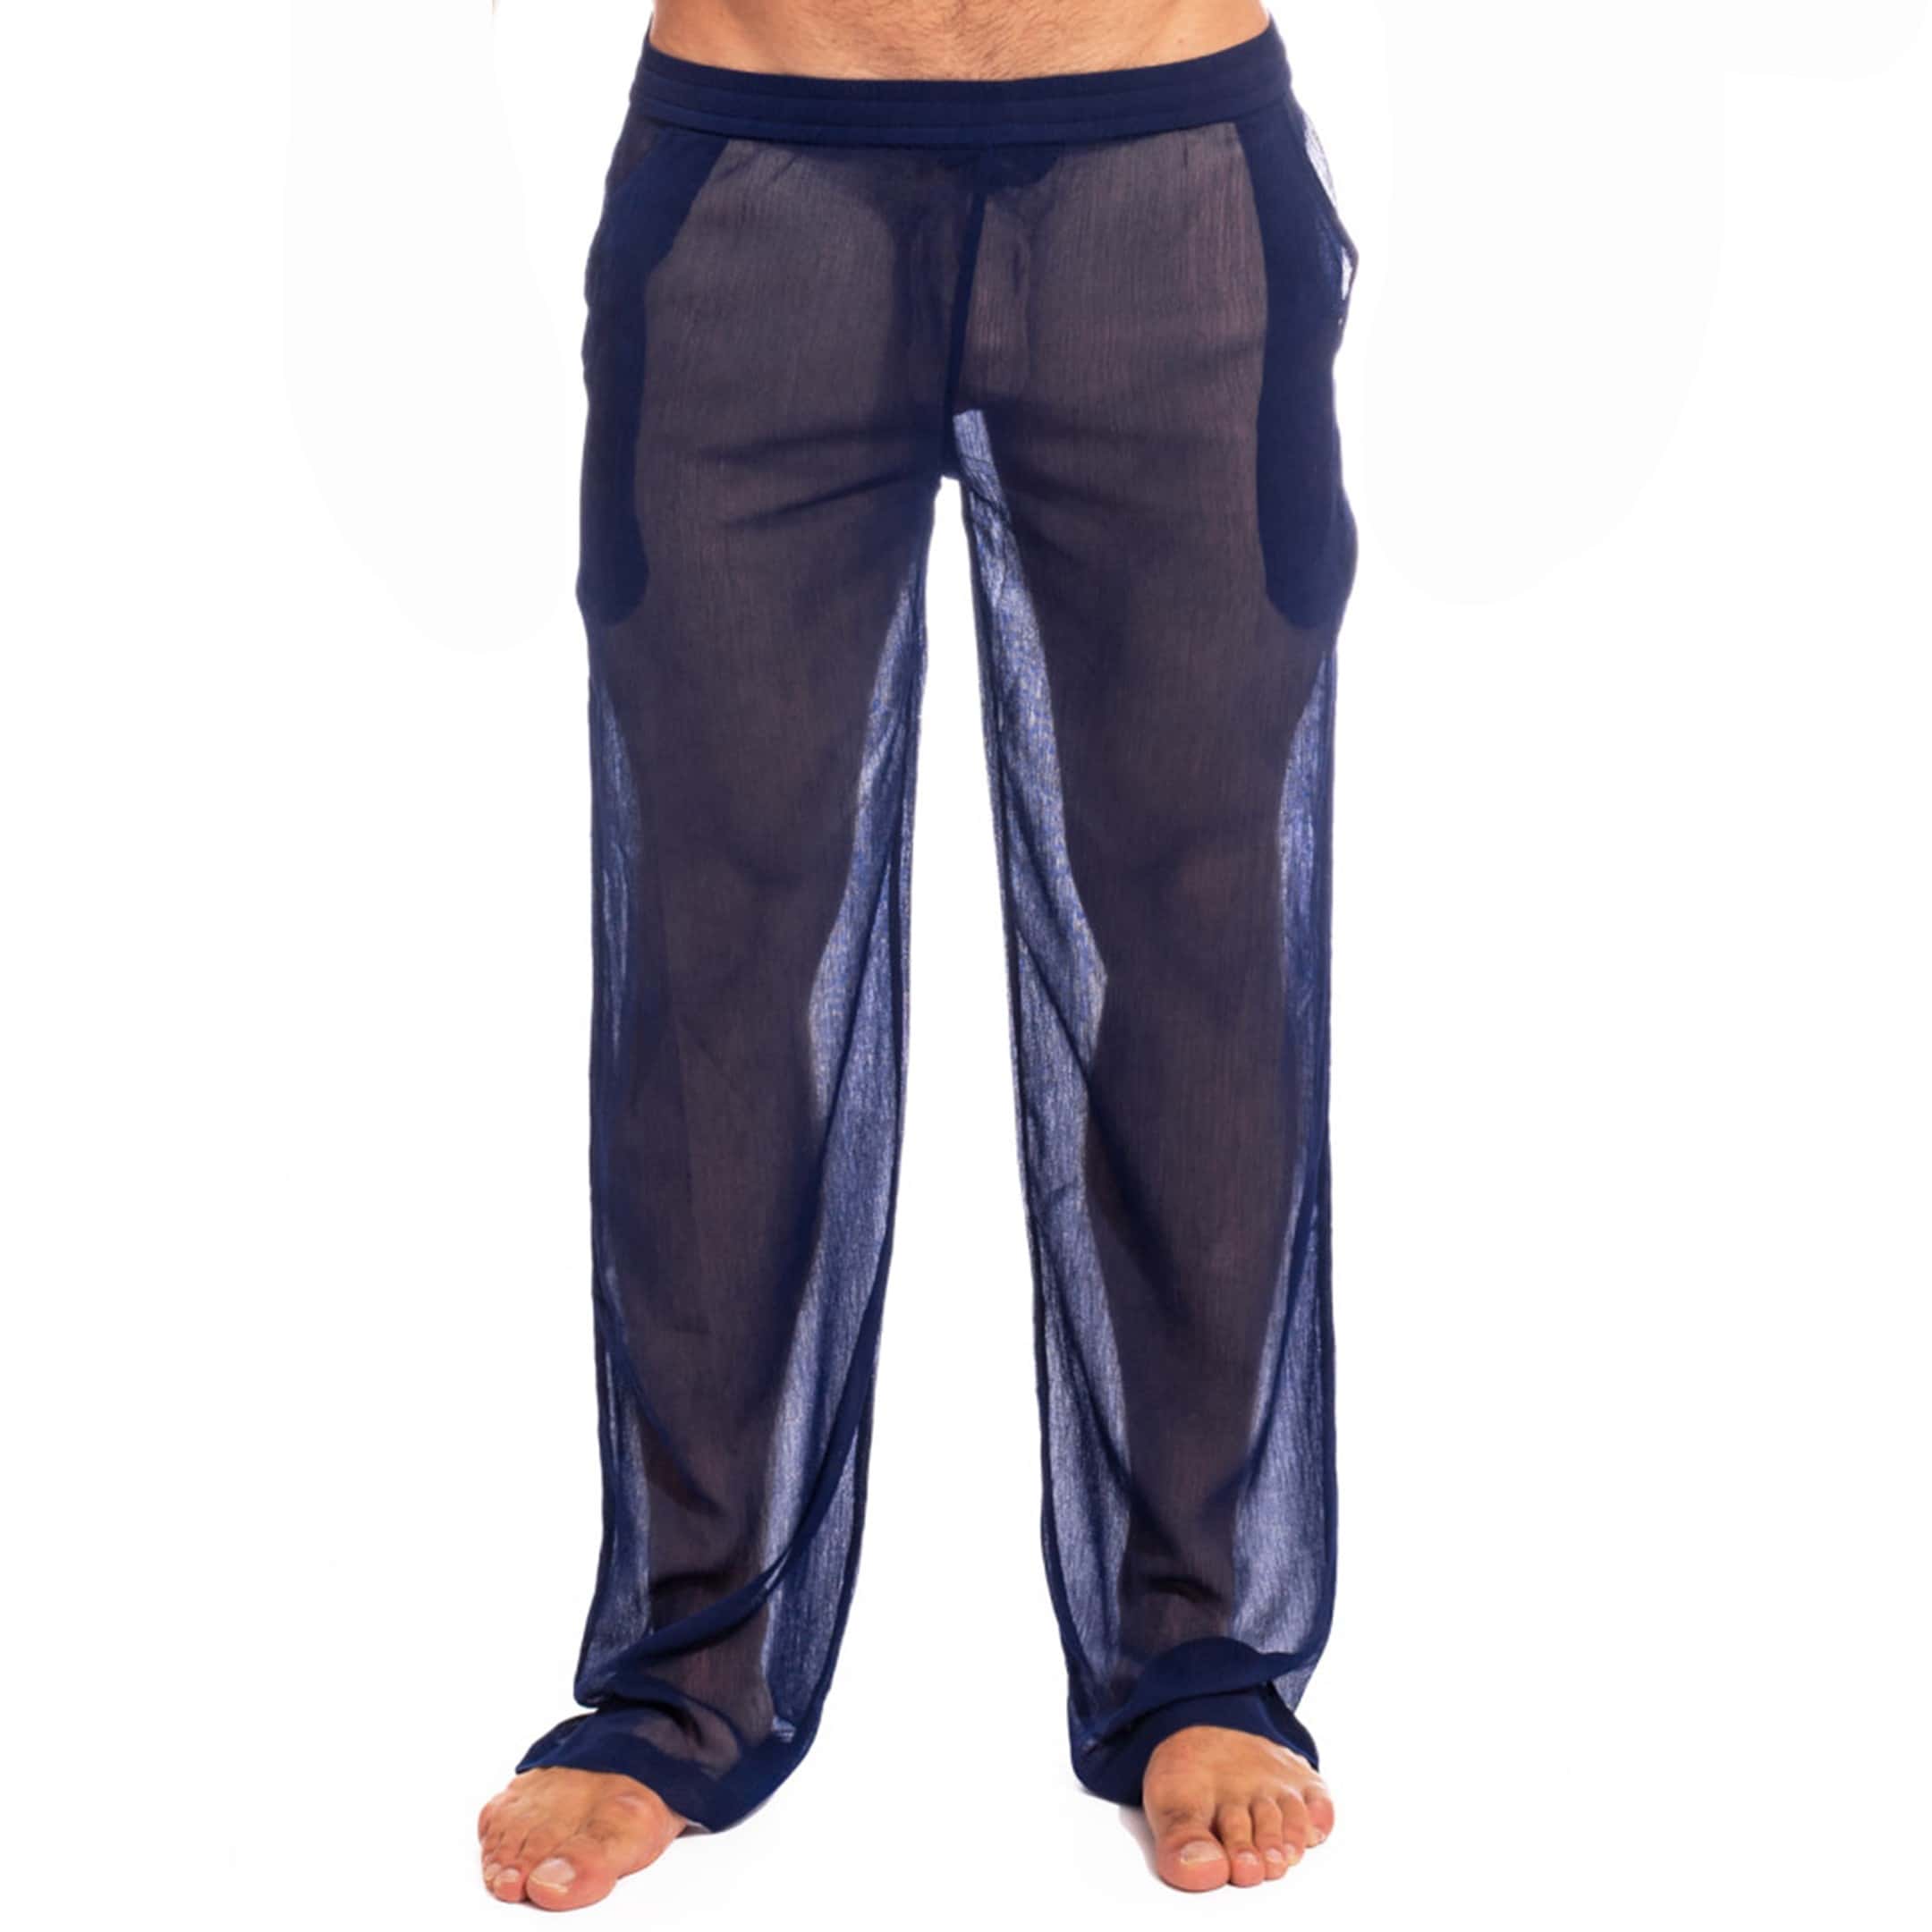 L'Homme invisible Chantilly Lounge Pants - Night Blue | INDERWEAR